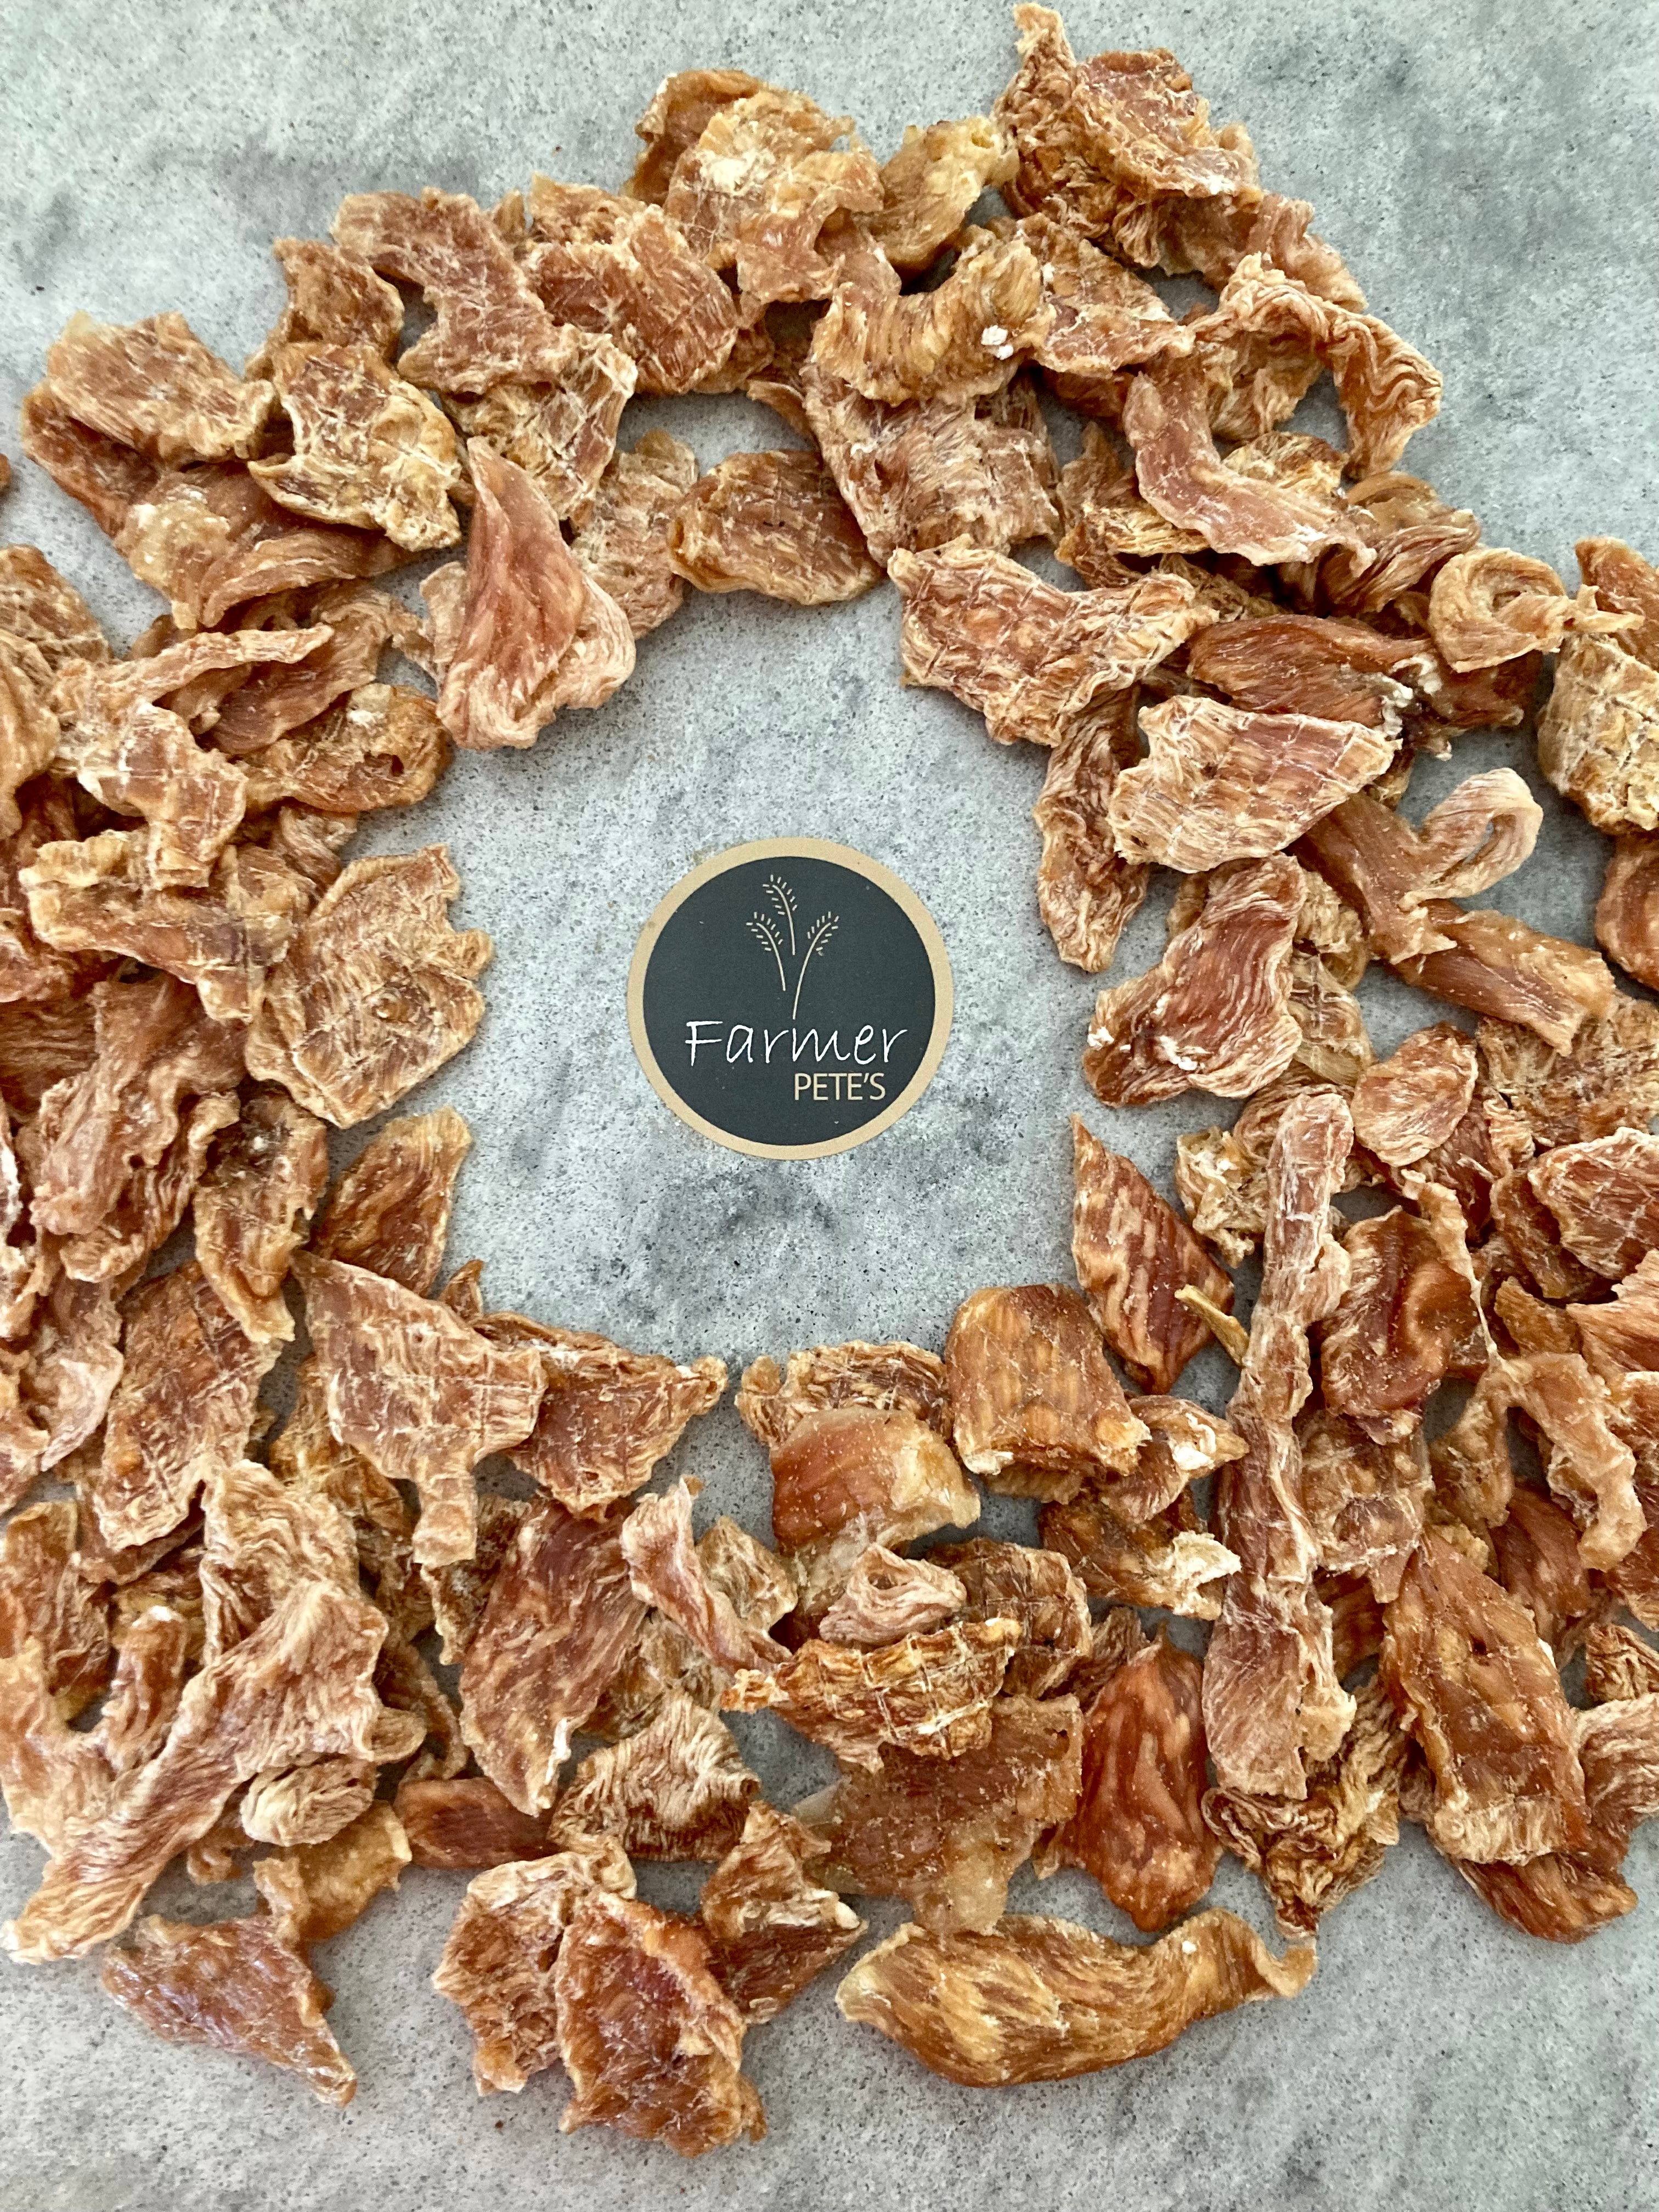 Farmer Pete's Natural dehydrated chicken jerky bites for pets.